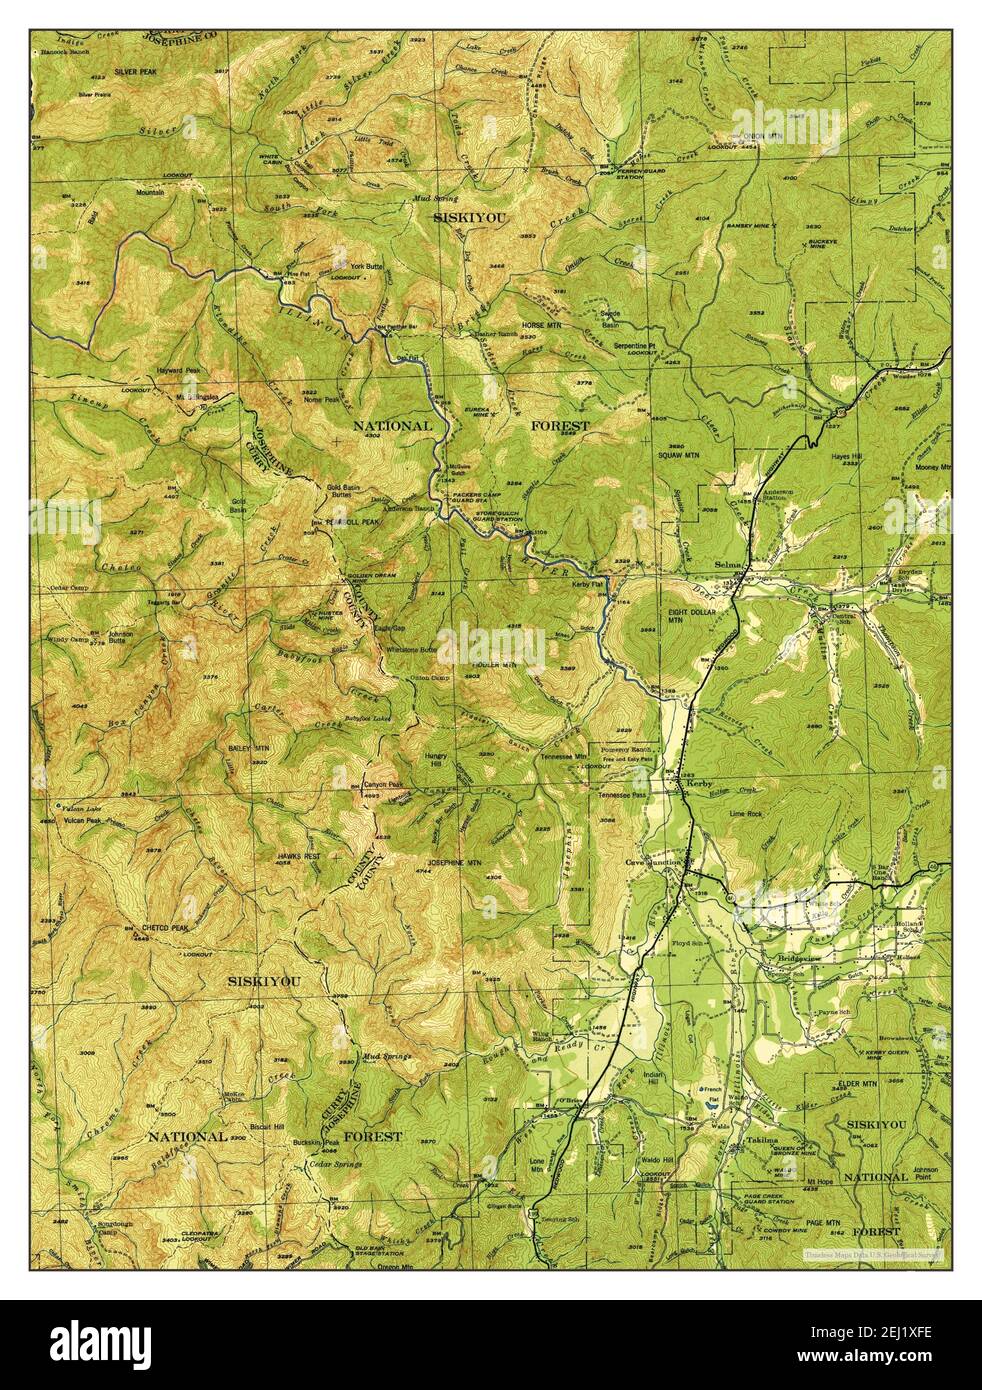 Kerby, Oregon, map 1945, 1:125000, United States of America by Timeless Maps, data U.S. Geological Survey Stock Photo